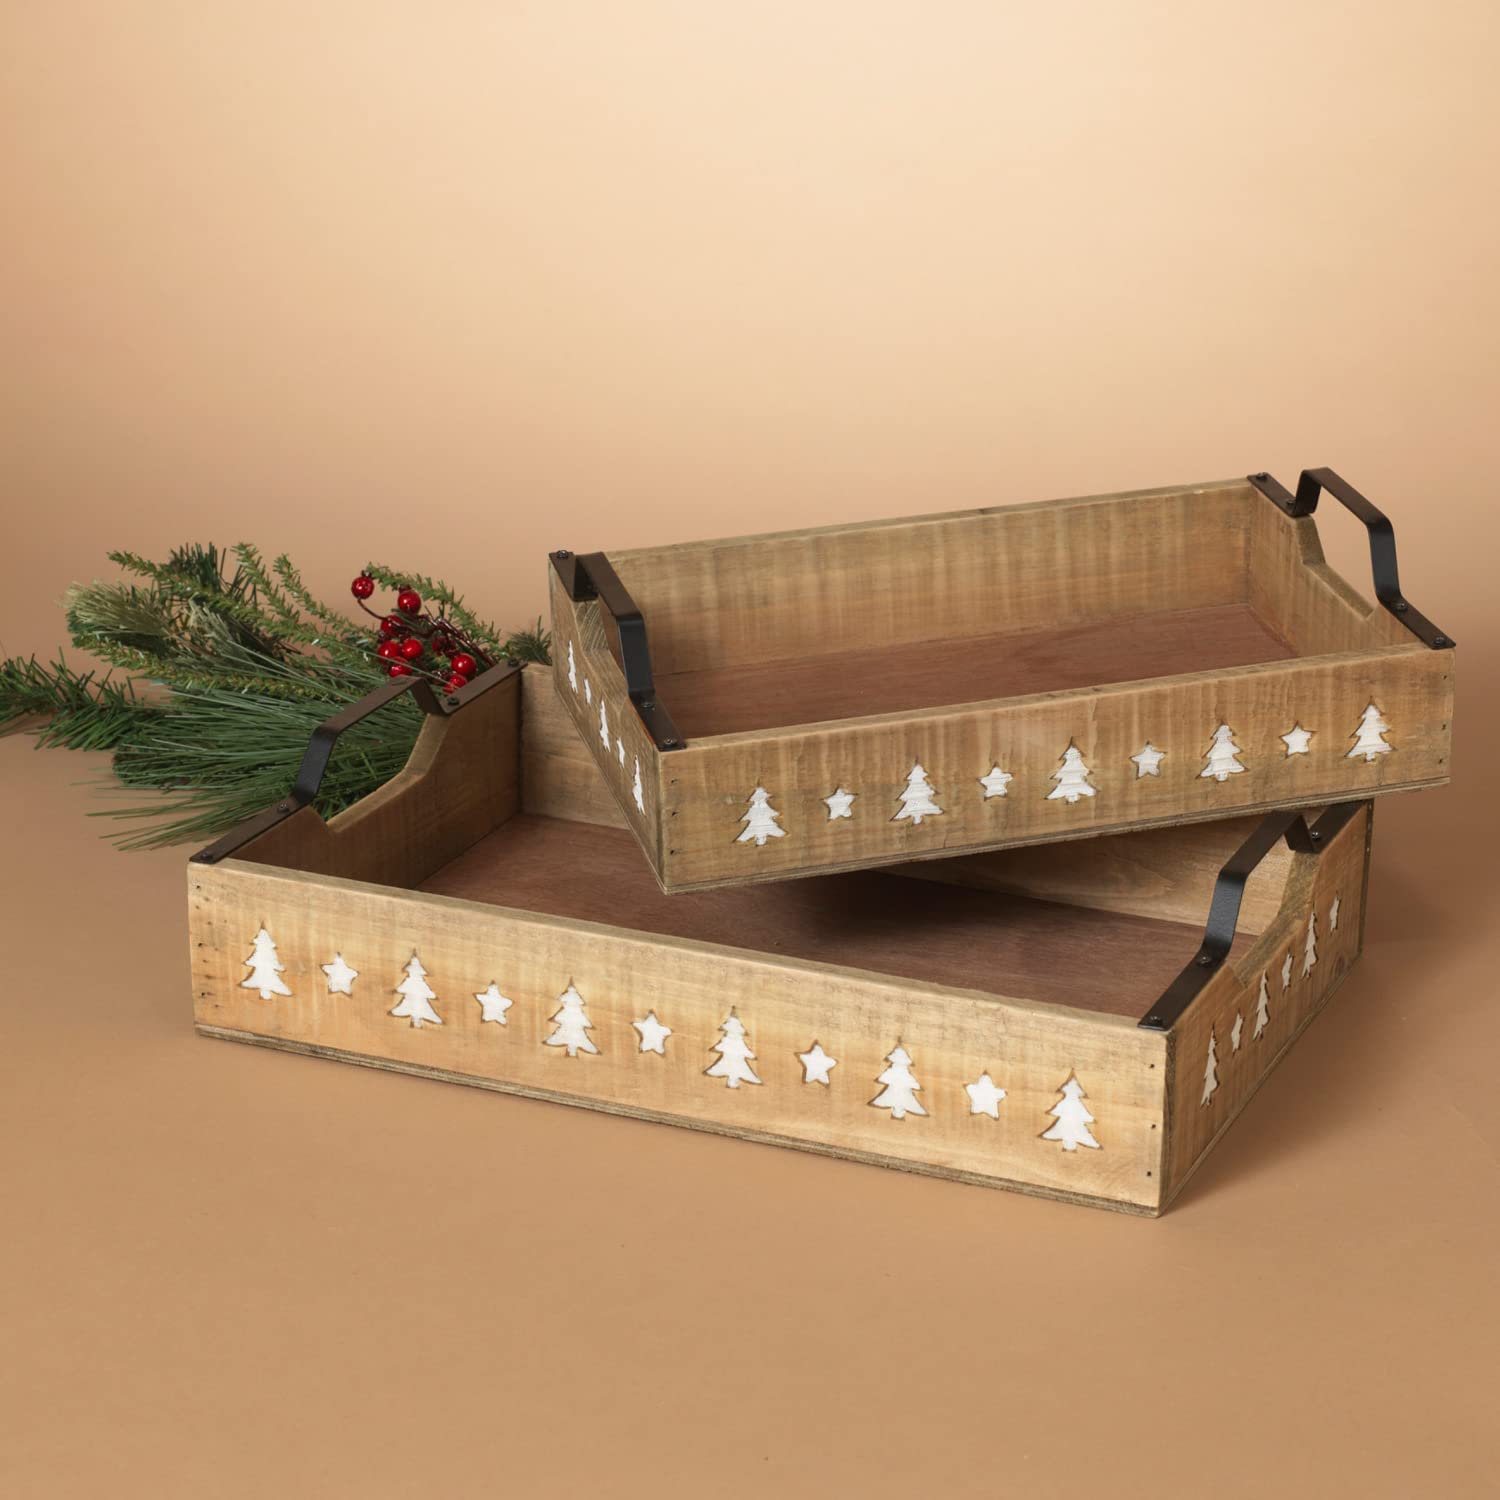 Set of 2 16-inch Nested Wood Trays w/Metal Handles and Christmas Trees -  One Holiday Way